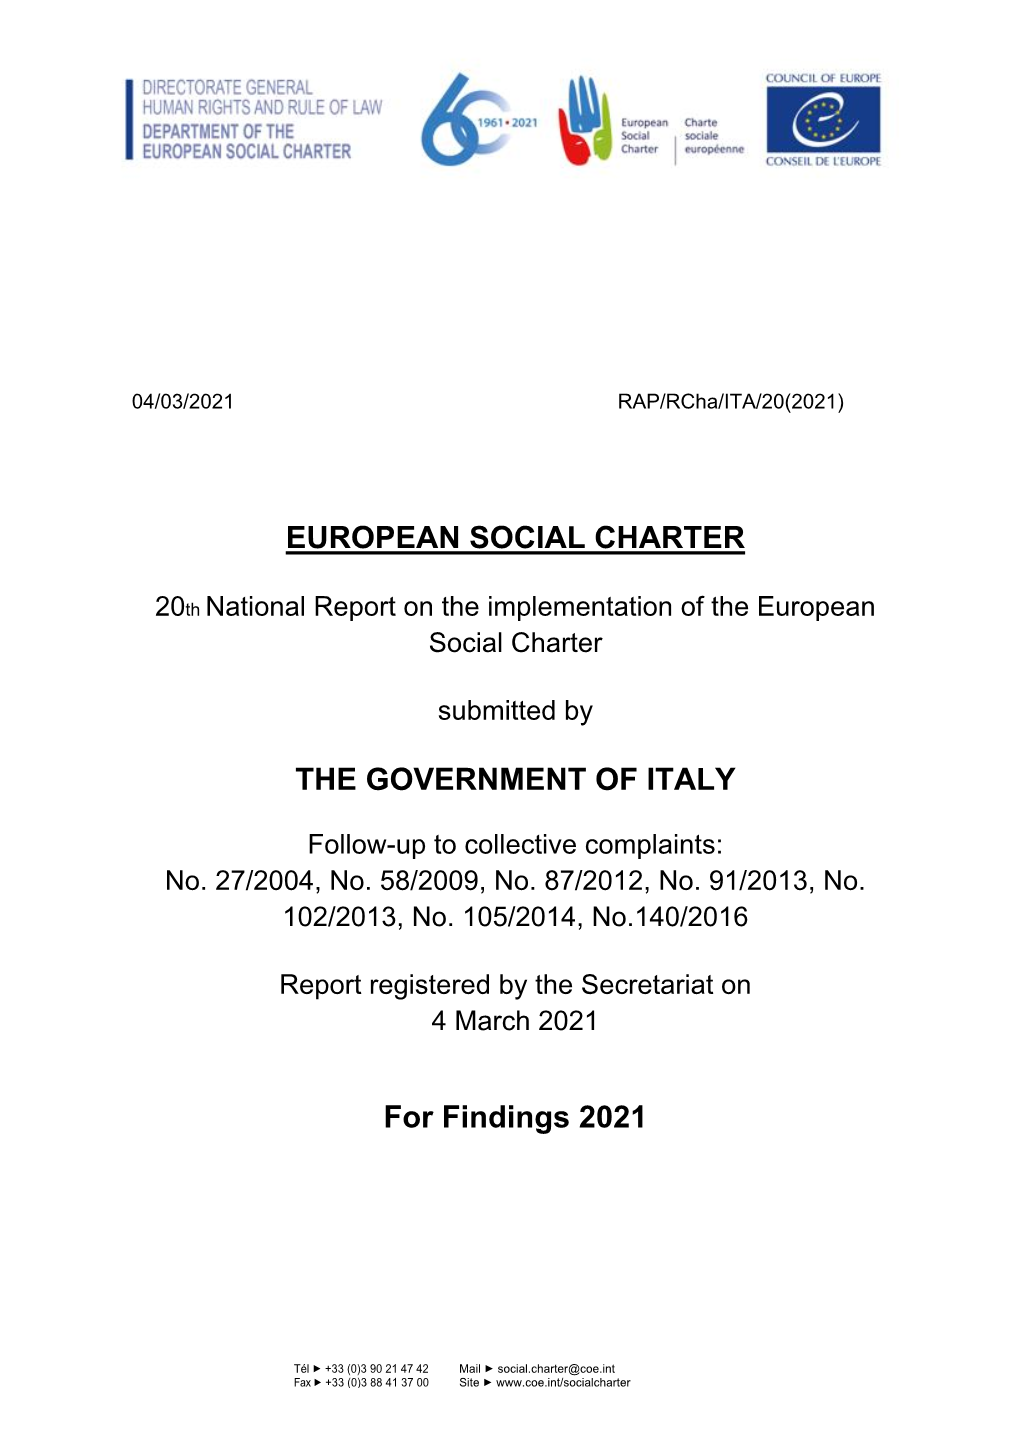 EUROPEAN SOCIAL CHARTER the GOVERNMENT of ITALY For